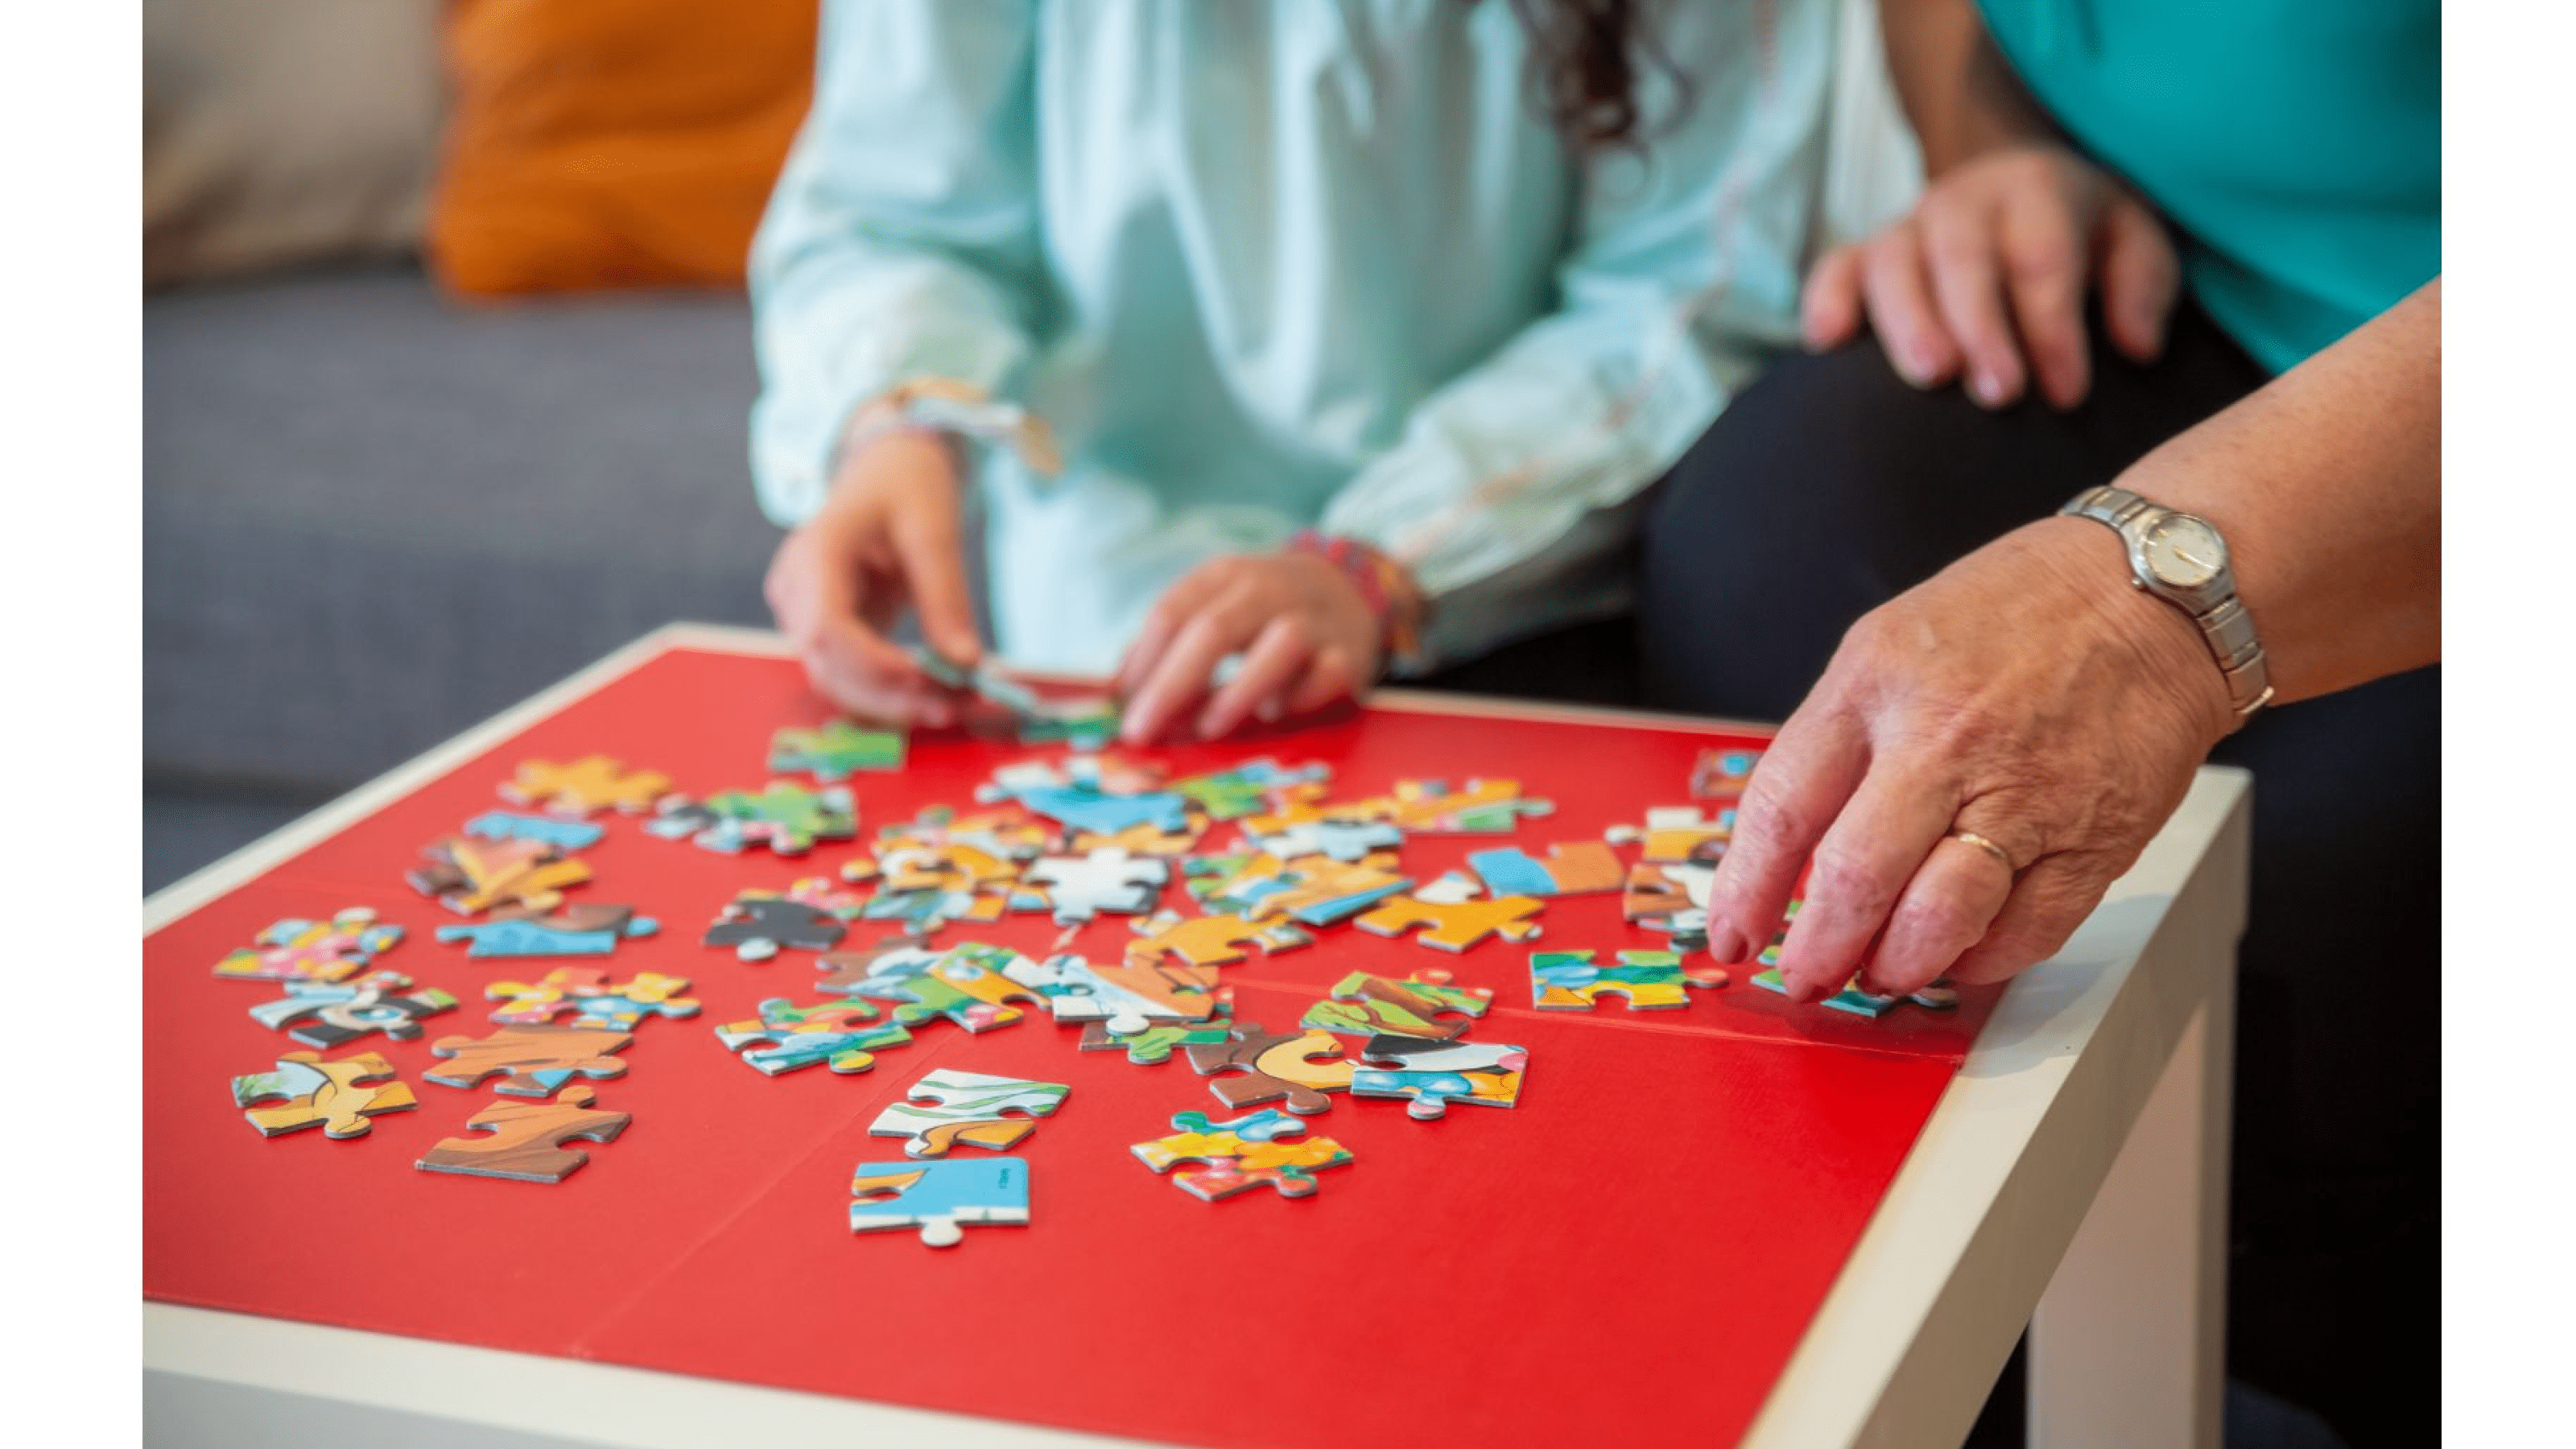 People completing jigsaw puzzles